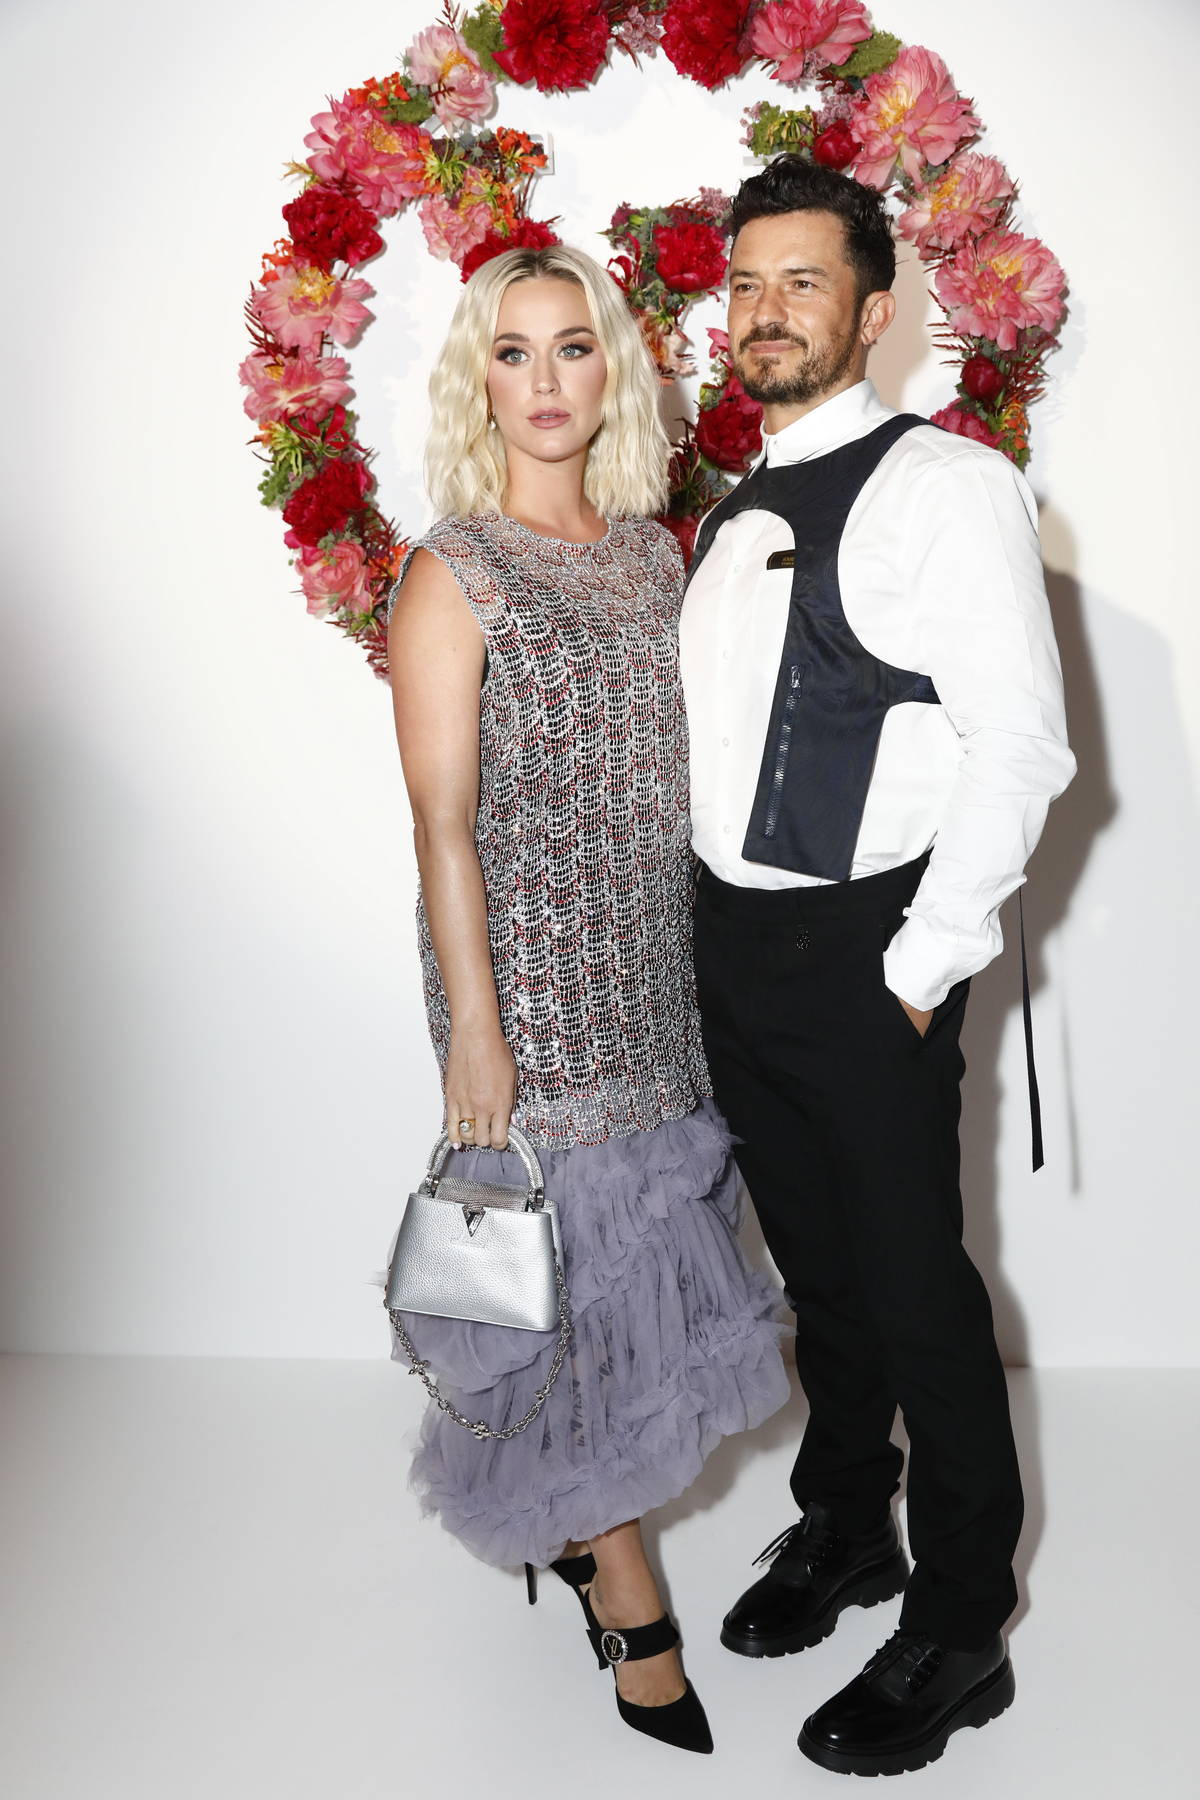 Katy Perry and Orlando Bloom attend the Louis Vuitton Fragrance Dinner at  the Louis Vuitton Foundation